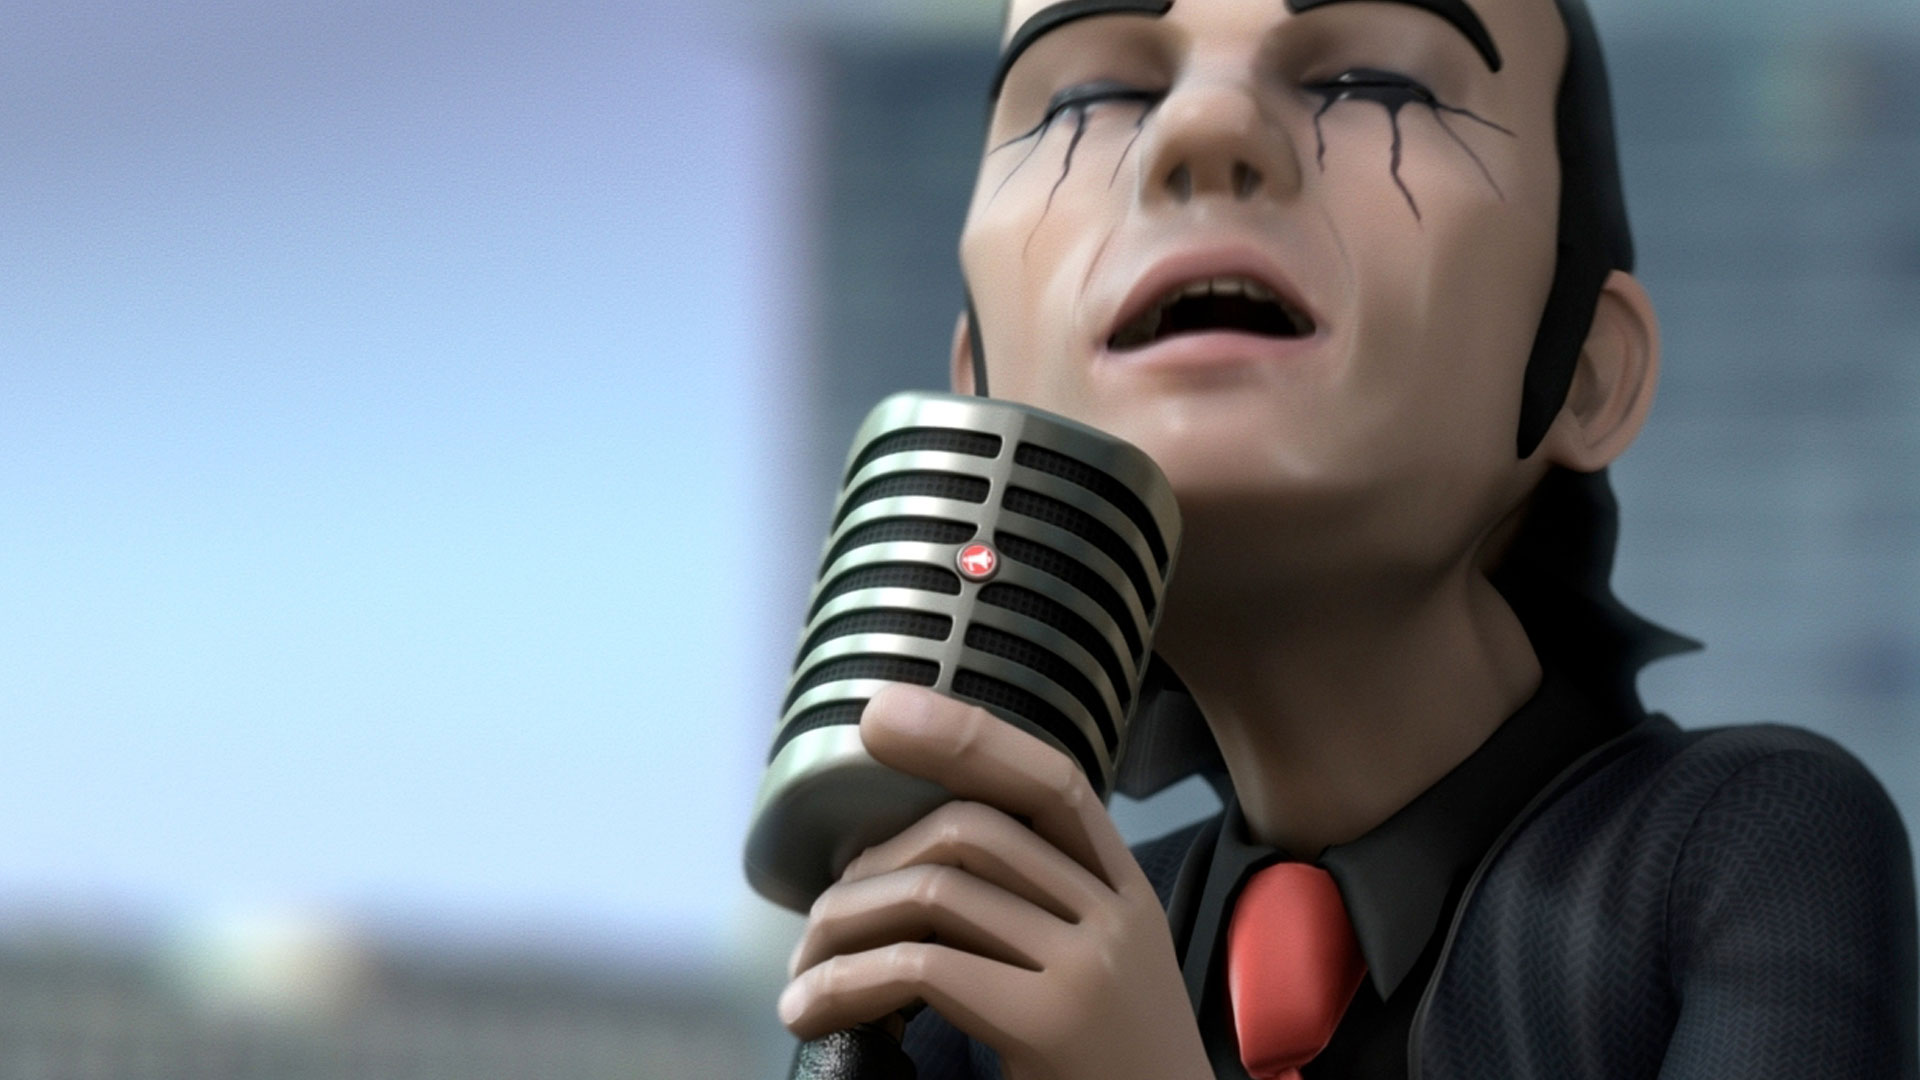 An animated image of a performer wearing dramatic black eyeliner, a black button up, and red tie, singing into a vintage style microphone. 